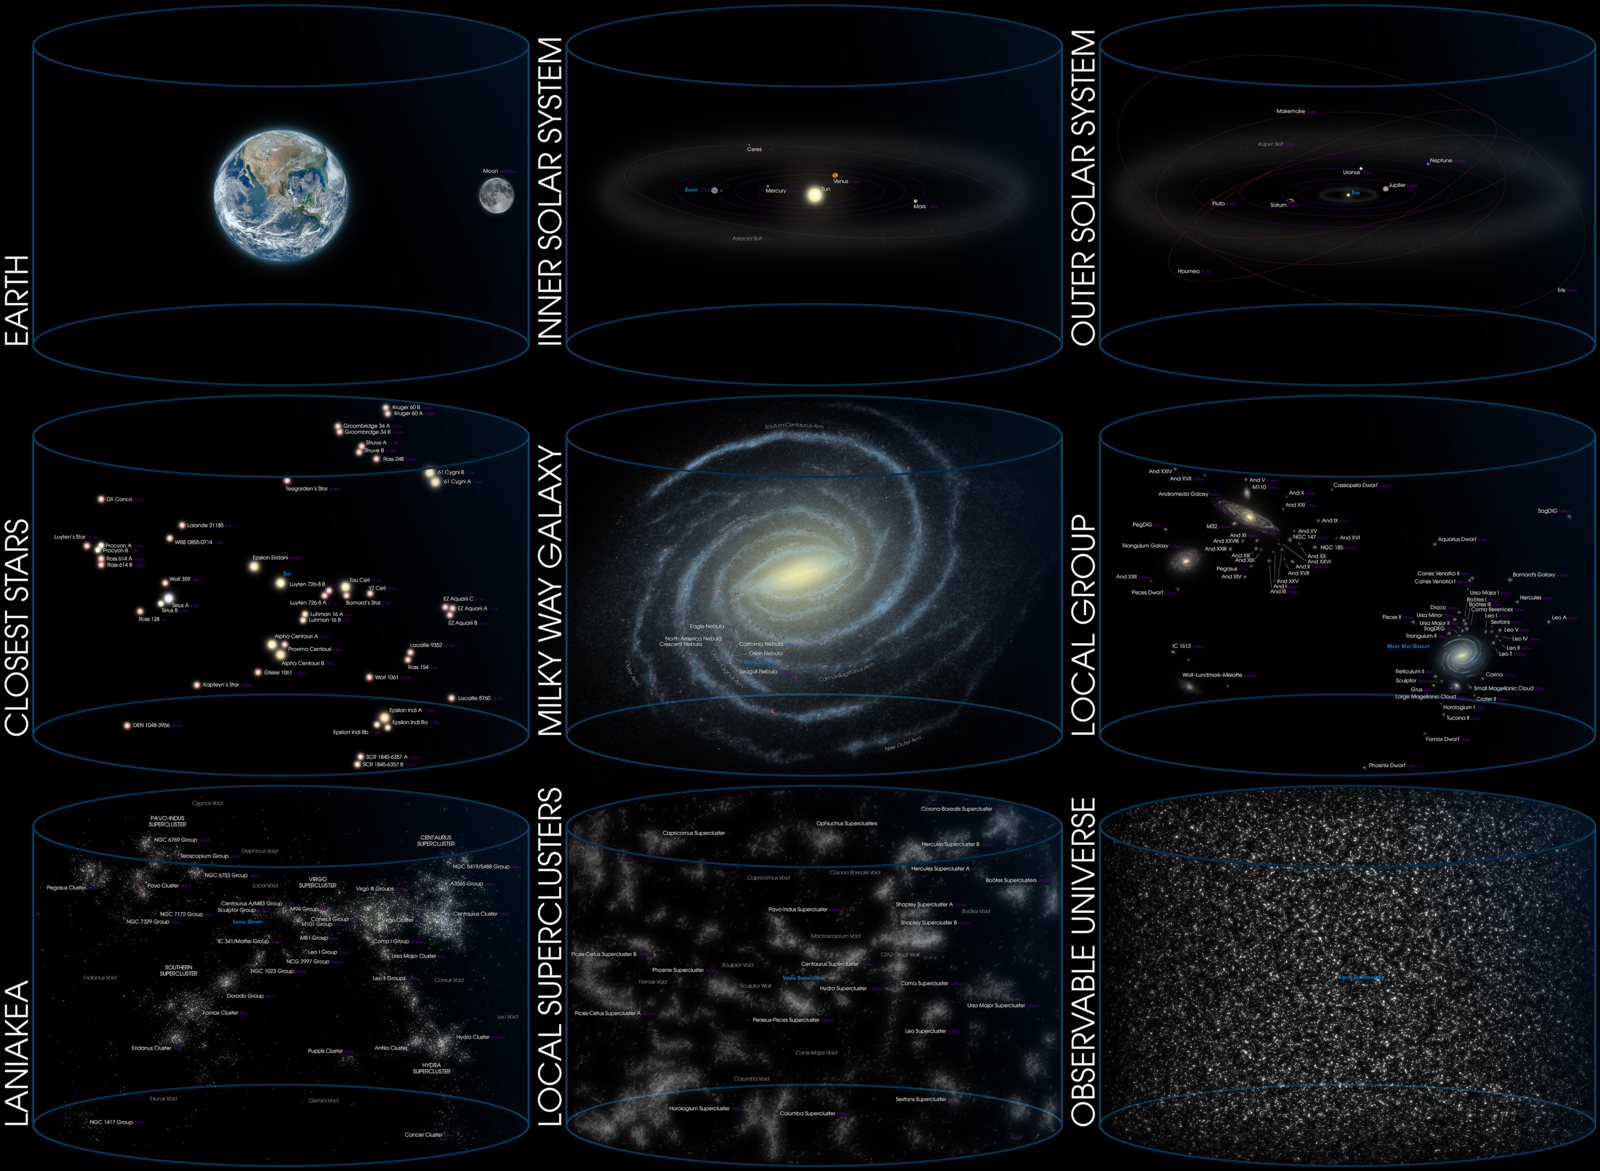  Azcolvin429, "An Illustration of the location of Earth in the Universe", Wikimedia, 2018 CE. The image consists of a series of nine frames. Our solar system becomes unobservable within the space of our galaxy, and our galaxy becomes practically unobservable within the size of the universe. The estimated number of stars in the Milky Way is 1011 to 1012, i.e., up to 1,000,000,000,000 stars. There are an estimated 2×1012 galaxies in the observable universe.